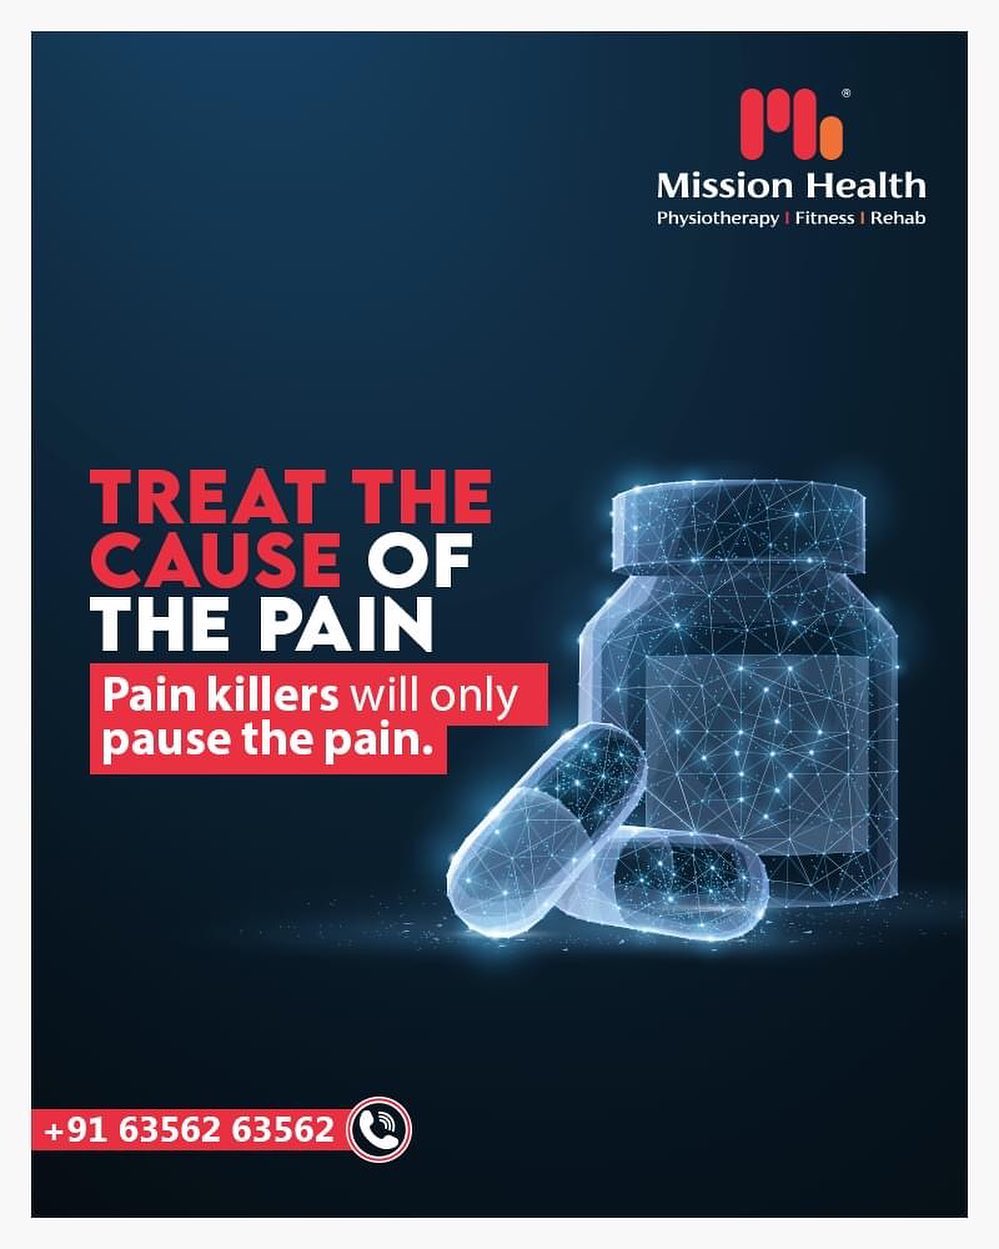 Permanent Solution or a Pause? 
The Pain Killer available just a shelf away can never treat you. It is always an Expert Advice and Regular Physiotherapy that can help you find the cause of your pain and treat the same.

How do you wish to treat PAIN could be one of the major decisions in your LIFE.

Share your 